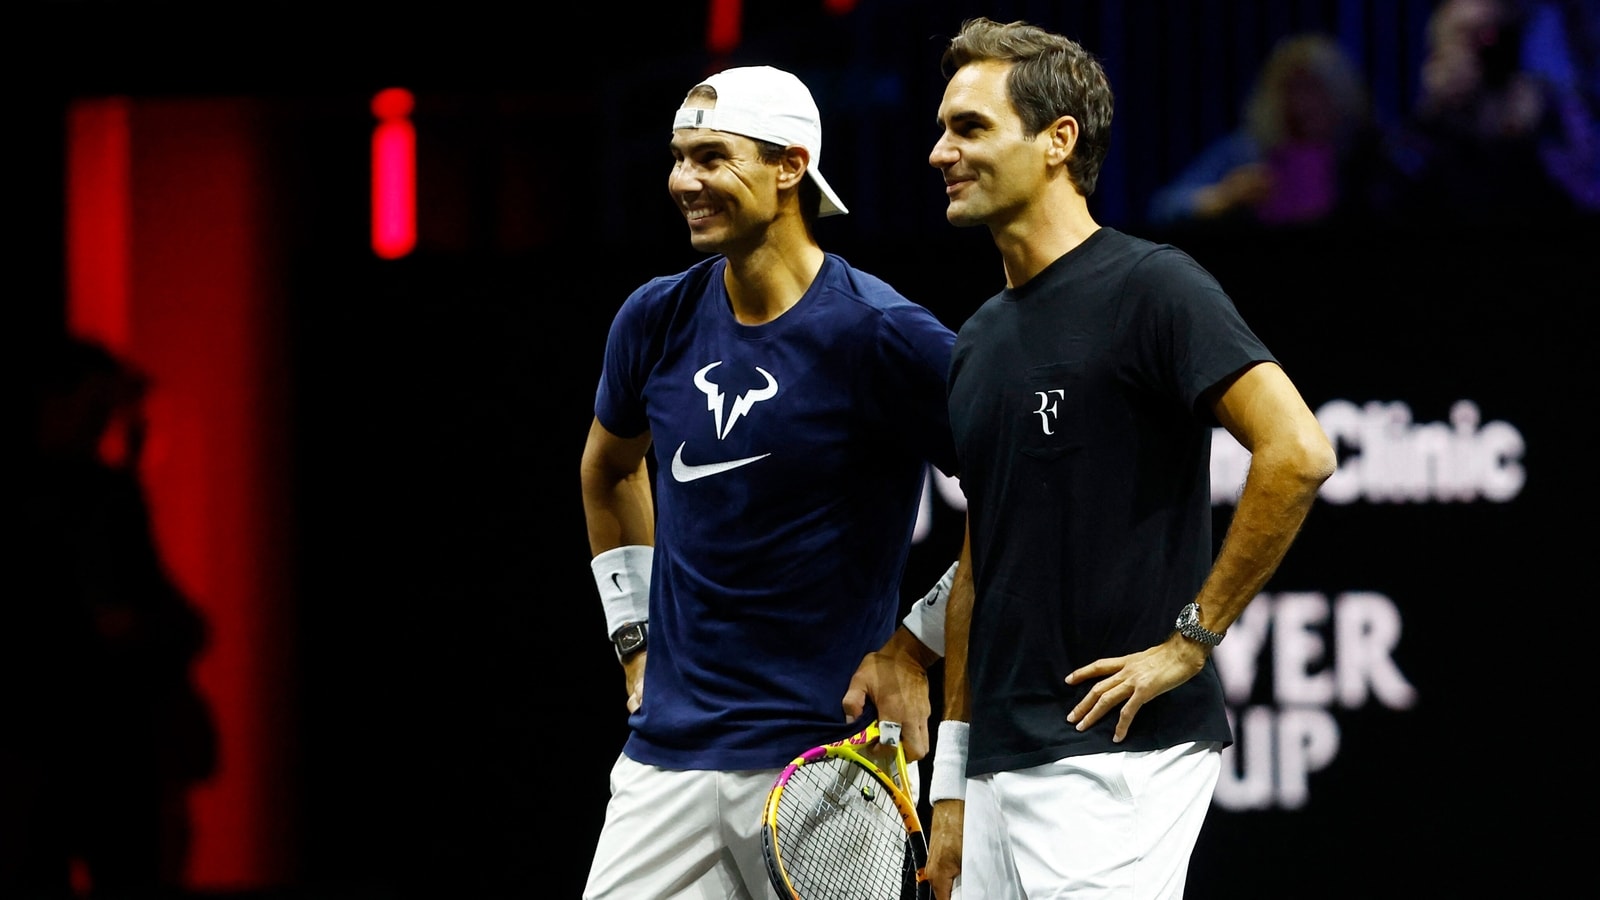 Laver Cup, live streaming: When and where to watch Federer and Nadal's match